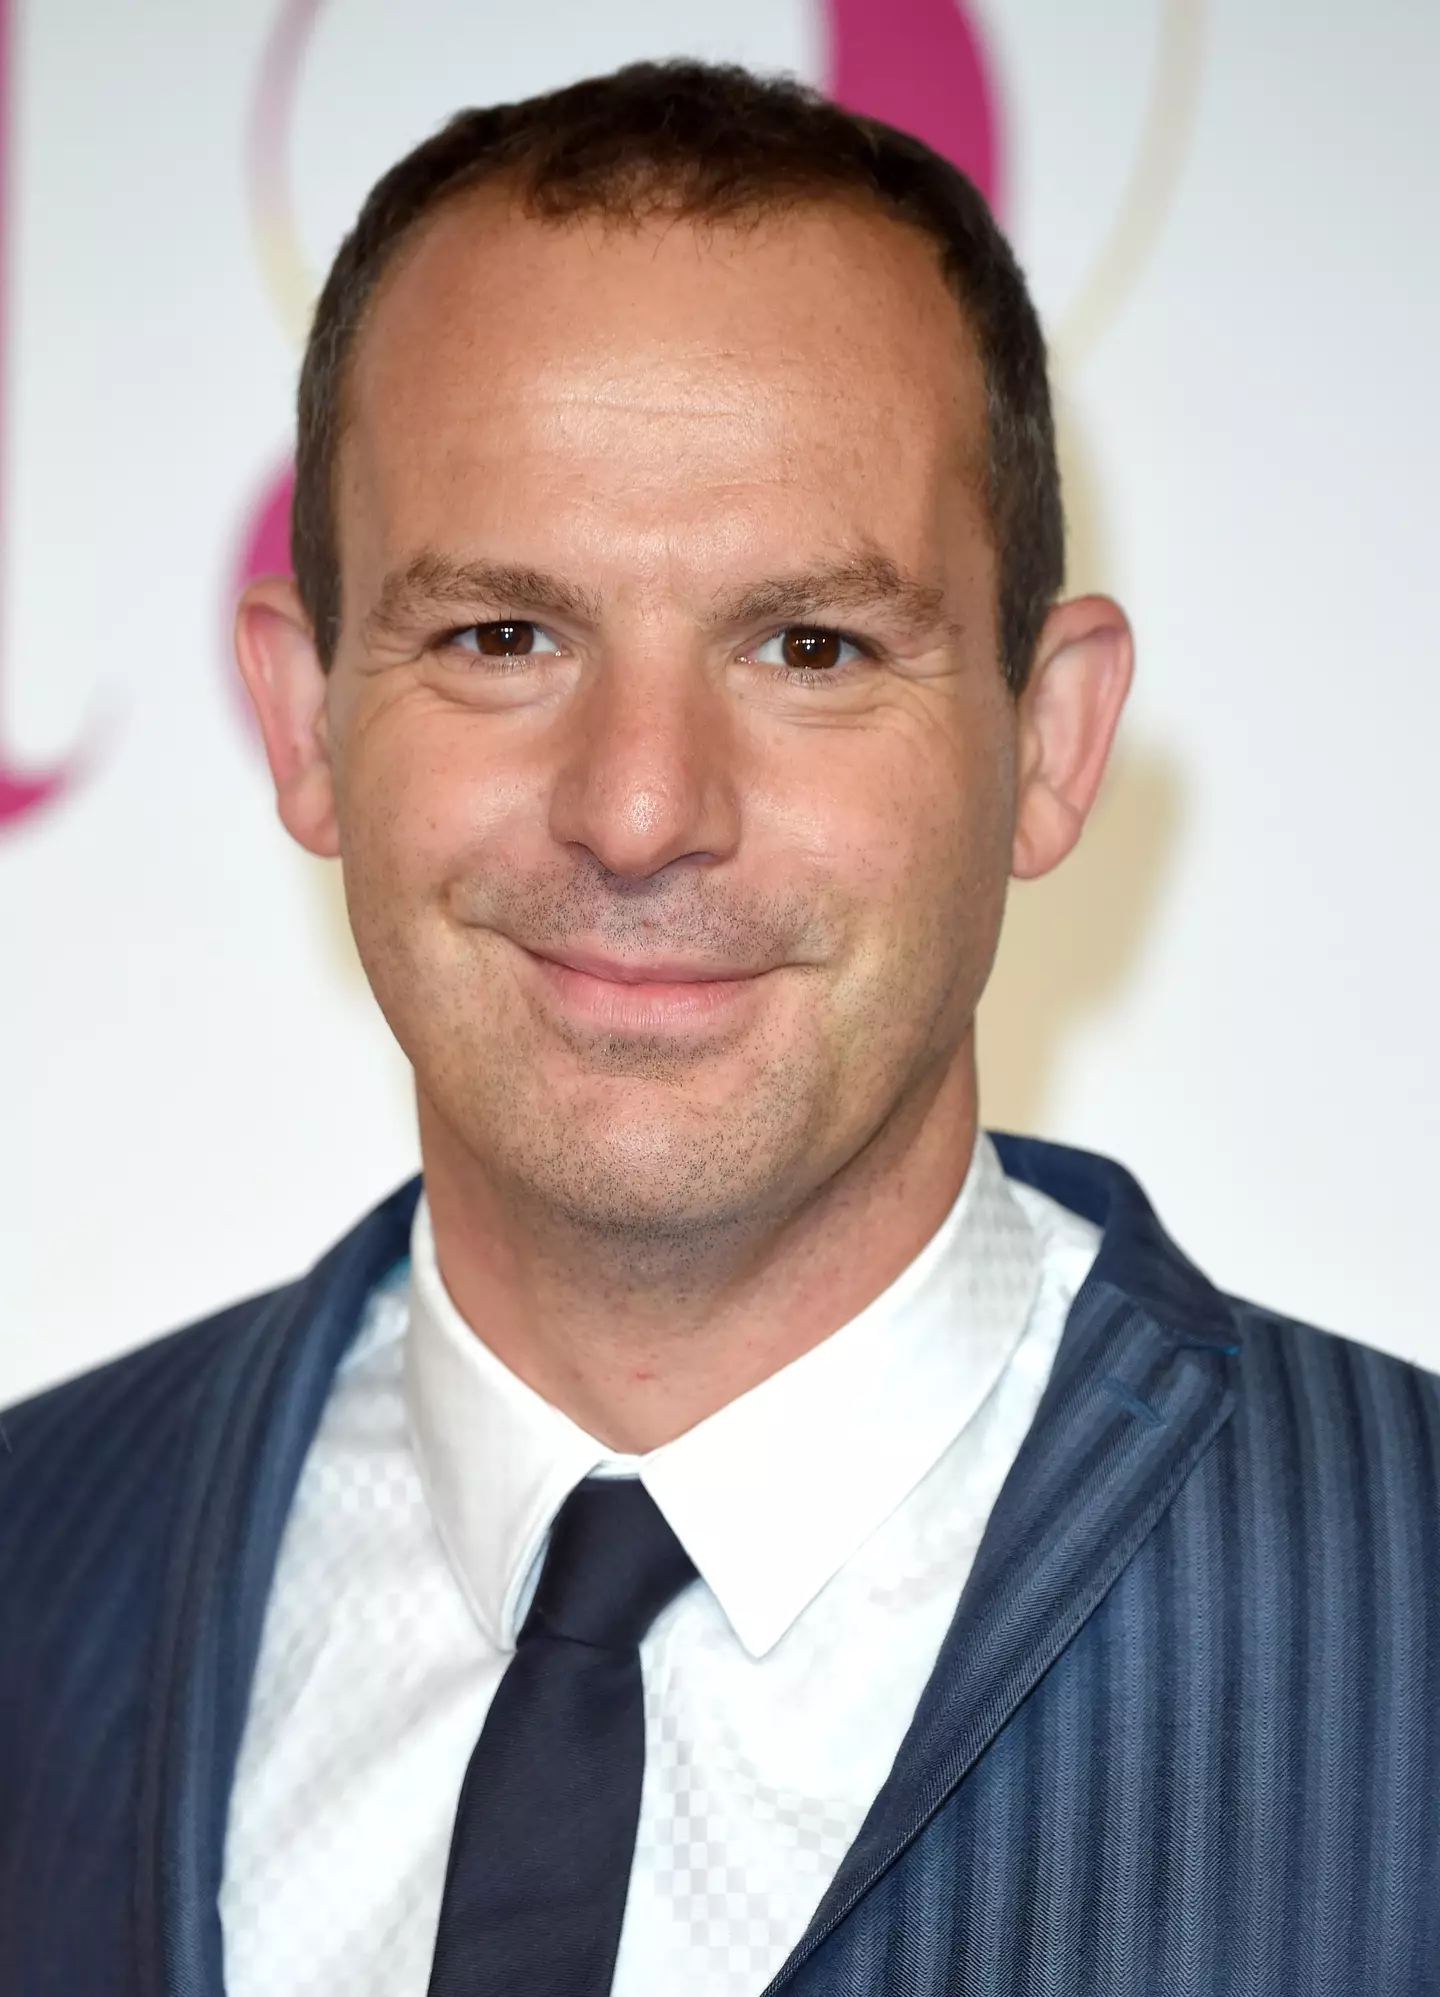 Martin Lewis often shared advice on how people can save or get more money.